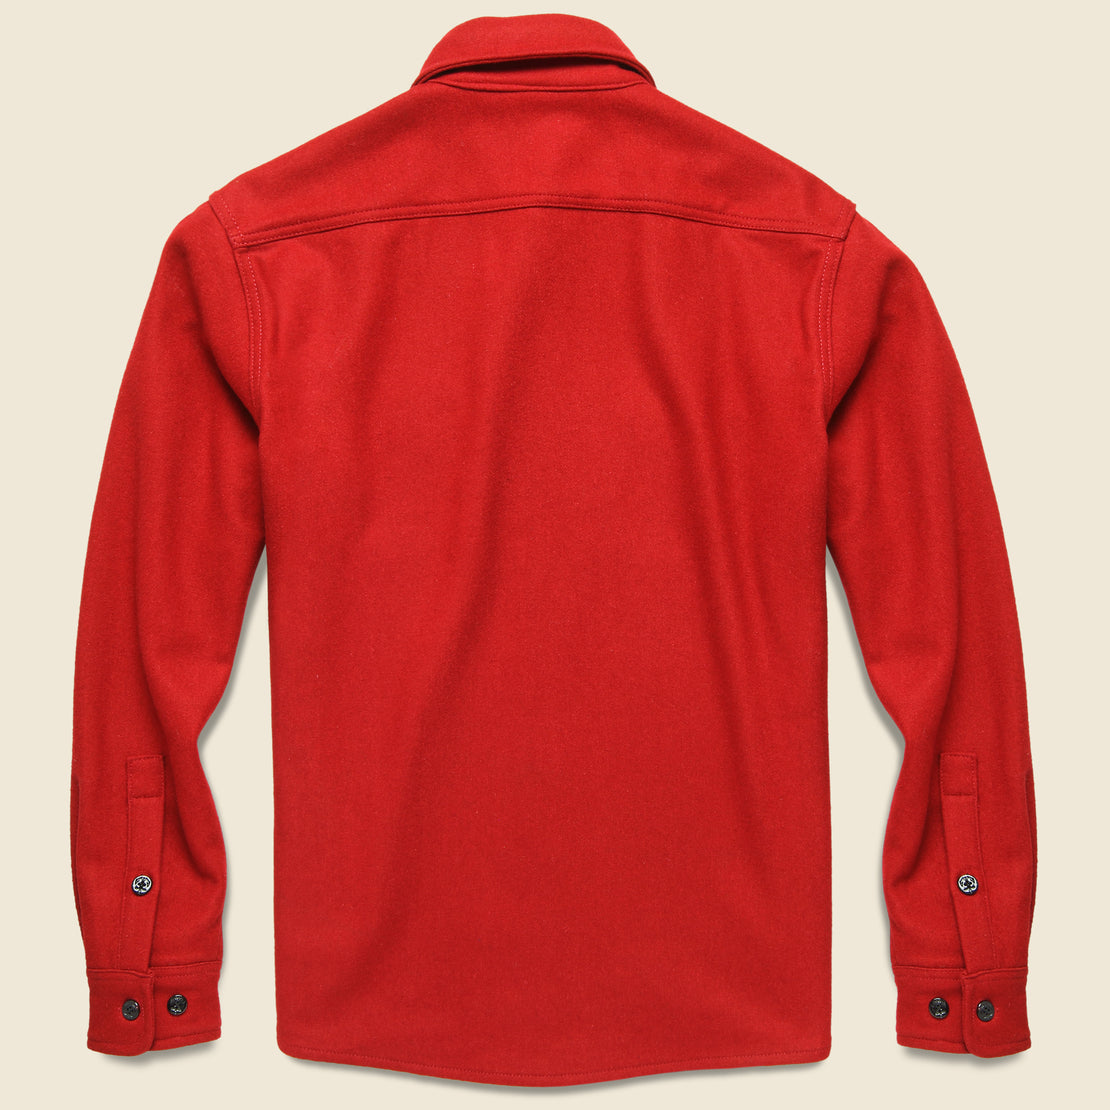 CPO Wool Shirt - Red - Schott - STAG Provisions - Tops - L/S Woven - Overshirt